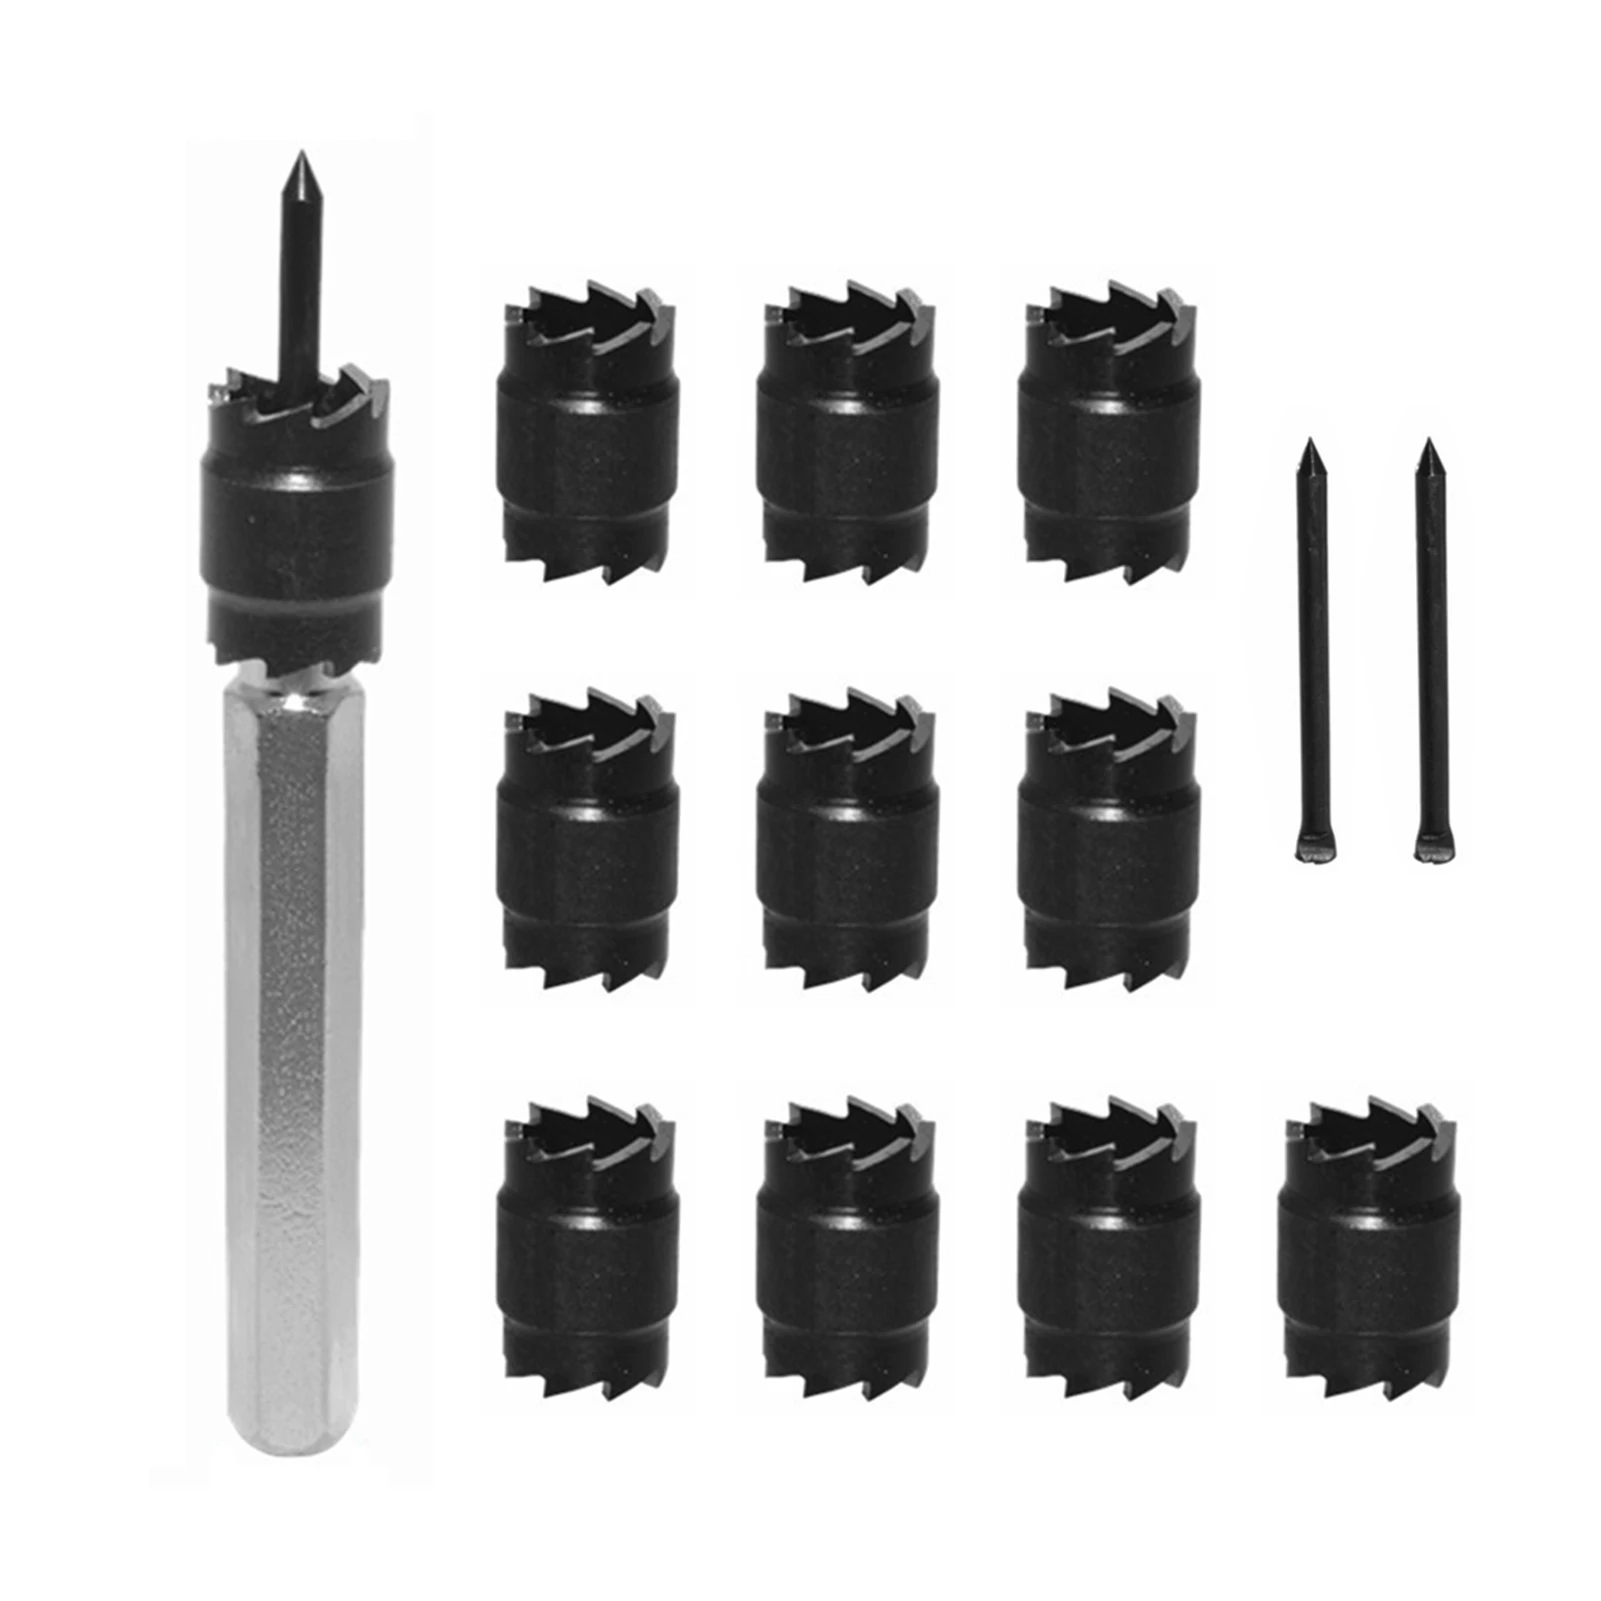 

13pcs Hex Metal Hole Combination Accessories 3/8" HSS Double Sided Spot Weld Cutter Set Drill Bits Remover Sheet Durable Rotary